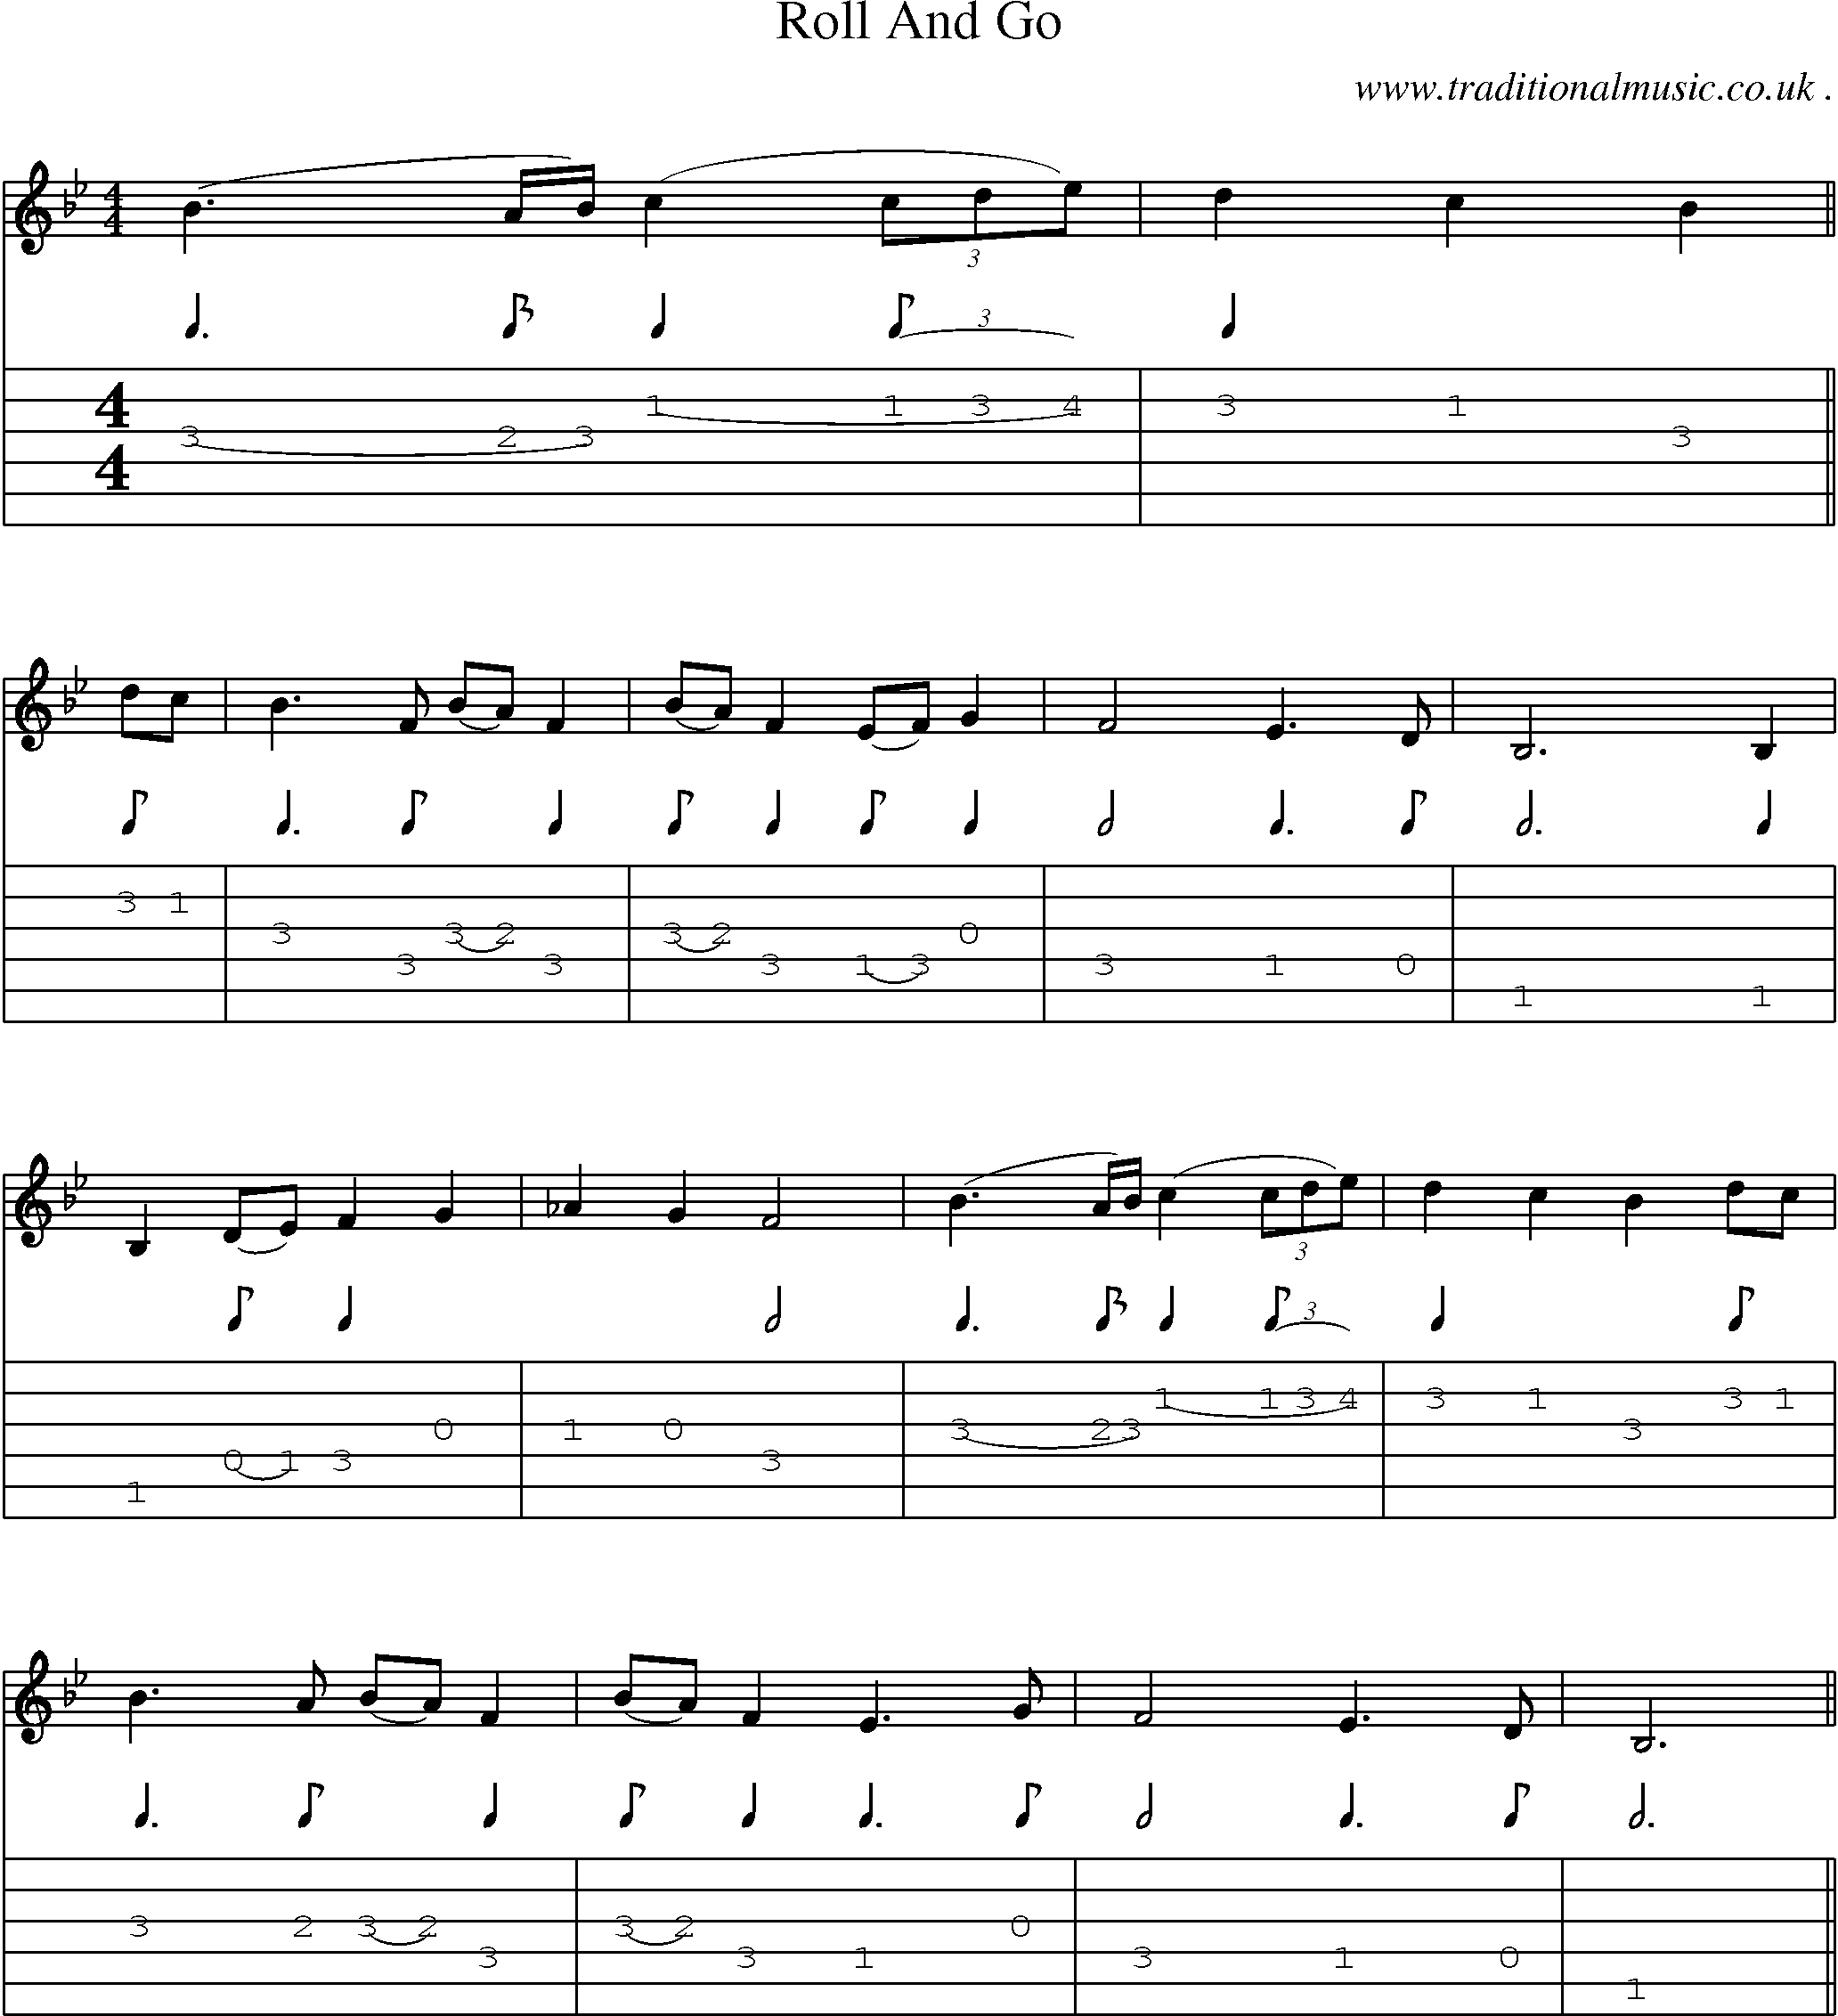 Sheet-Music and Guitar Tabs for Roll And Go